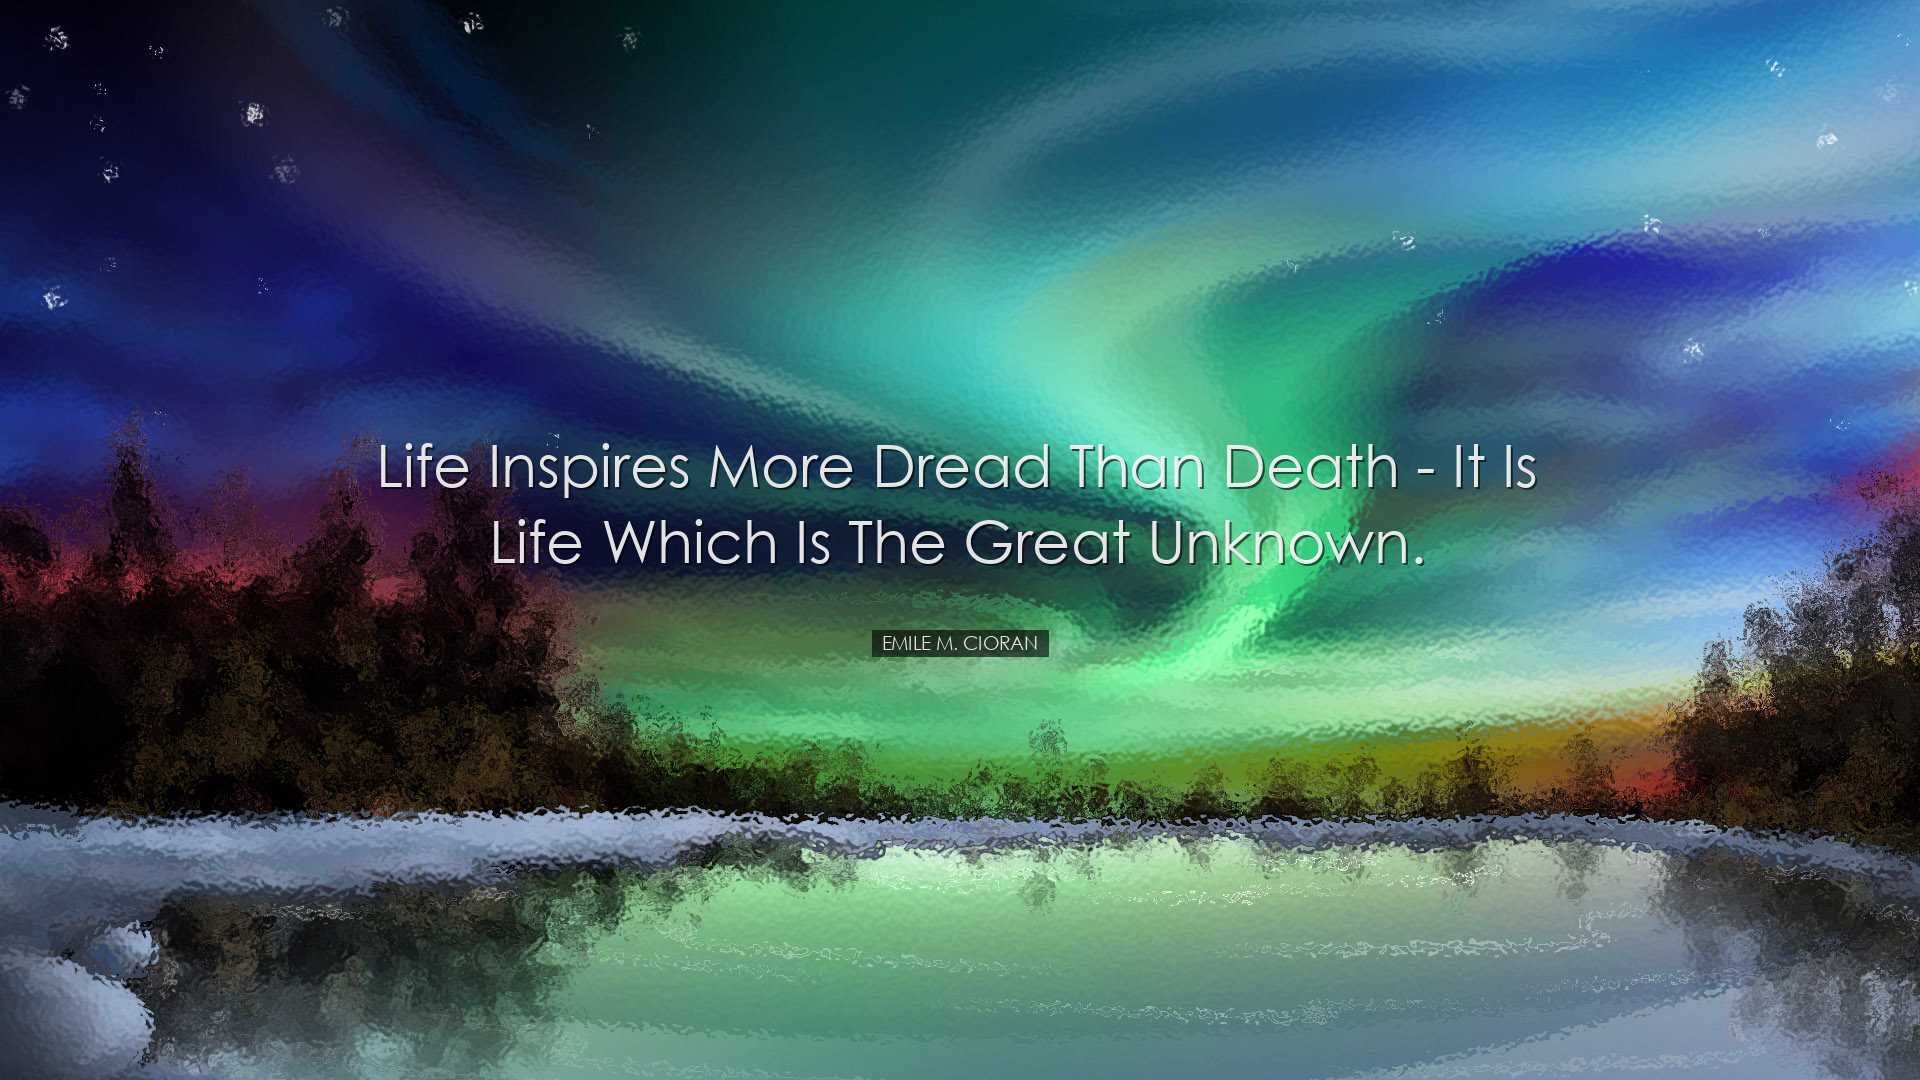 Life inspires more dread than death - it is life which is the grea